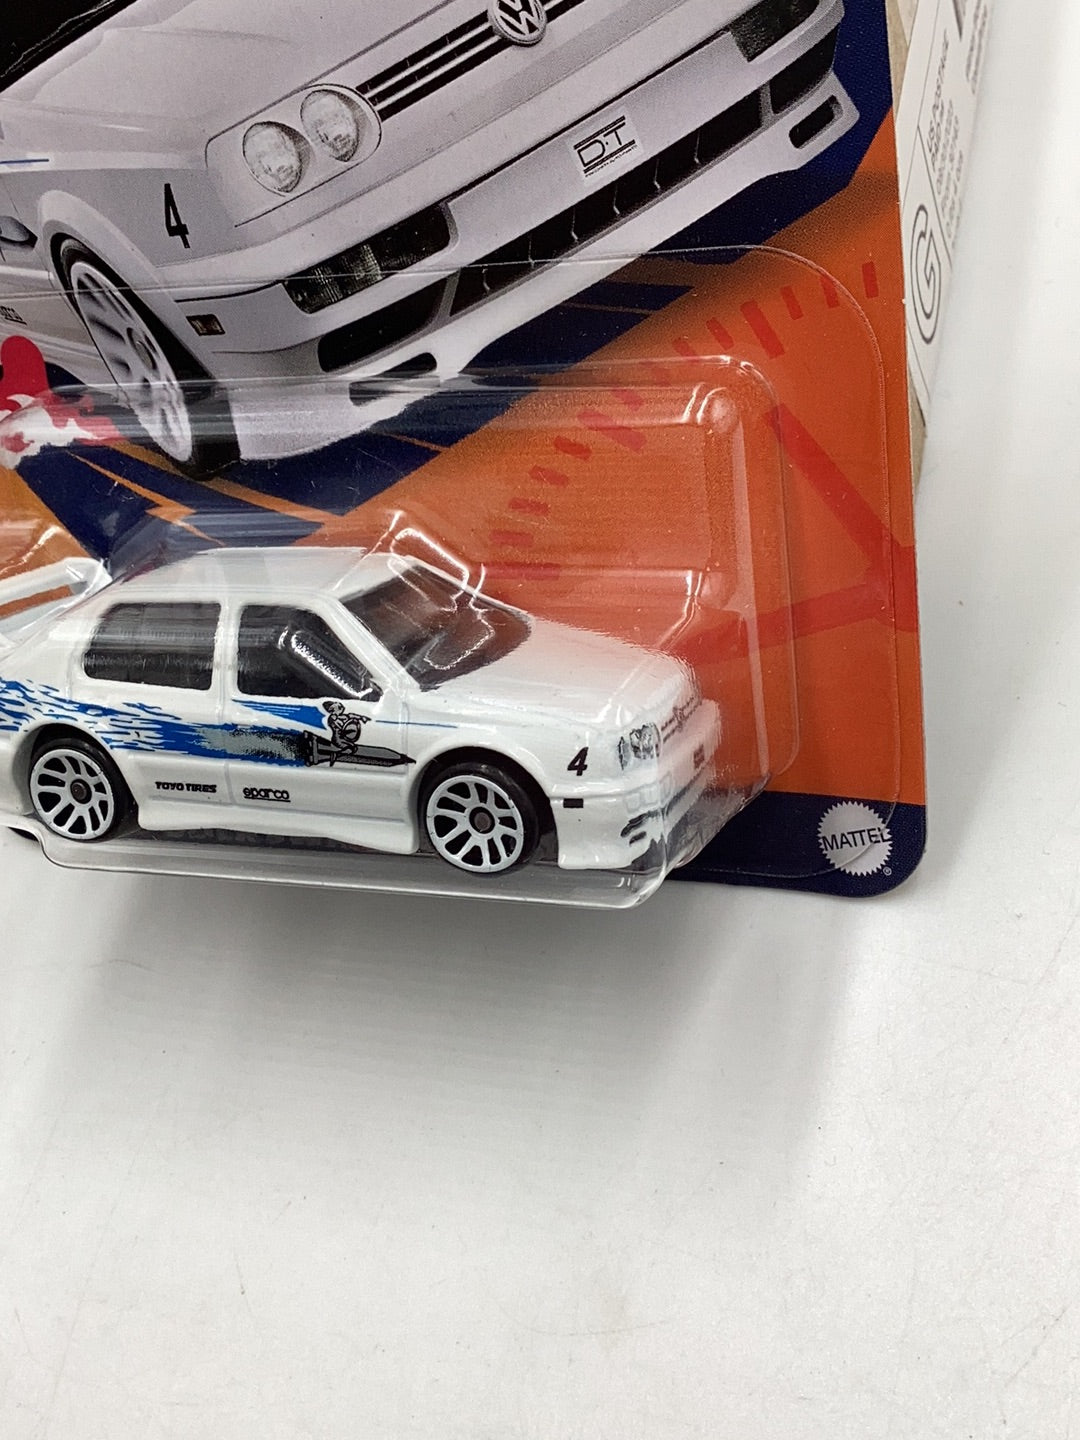 Hot Wheels Fast and Furious Volkswagen Jetta MK3 HW Decades of Fast 4/5 157G